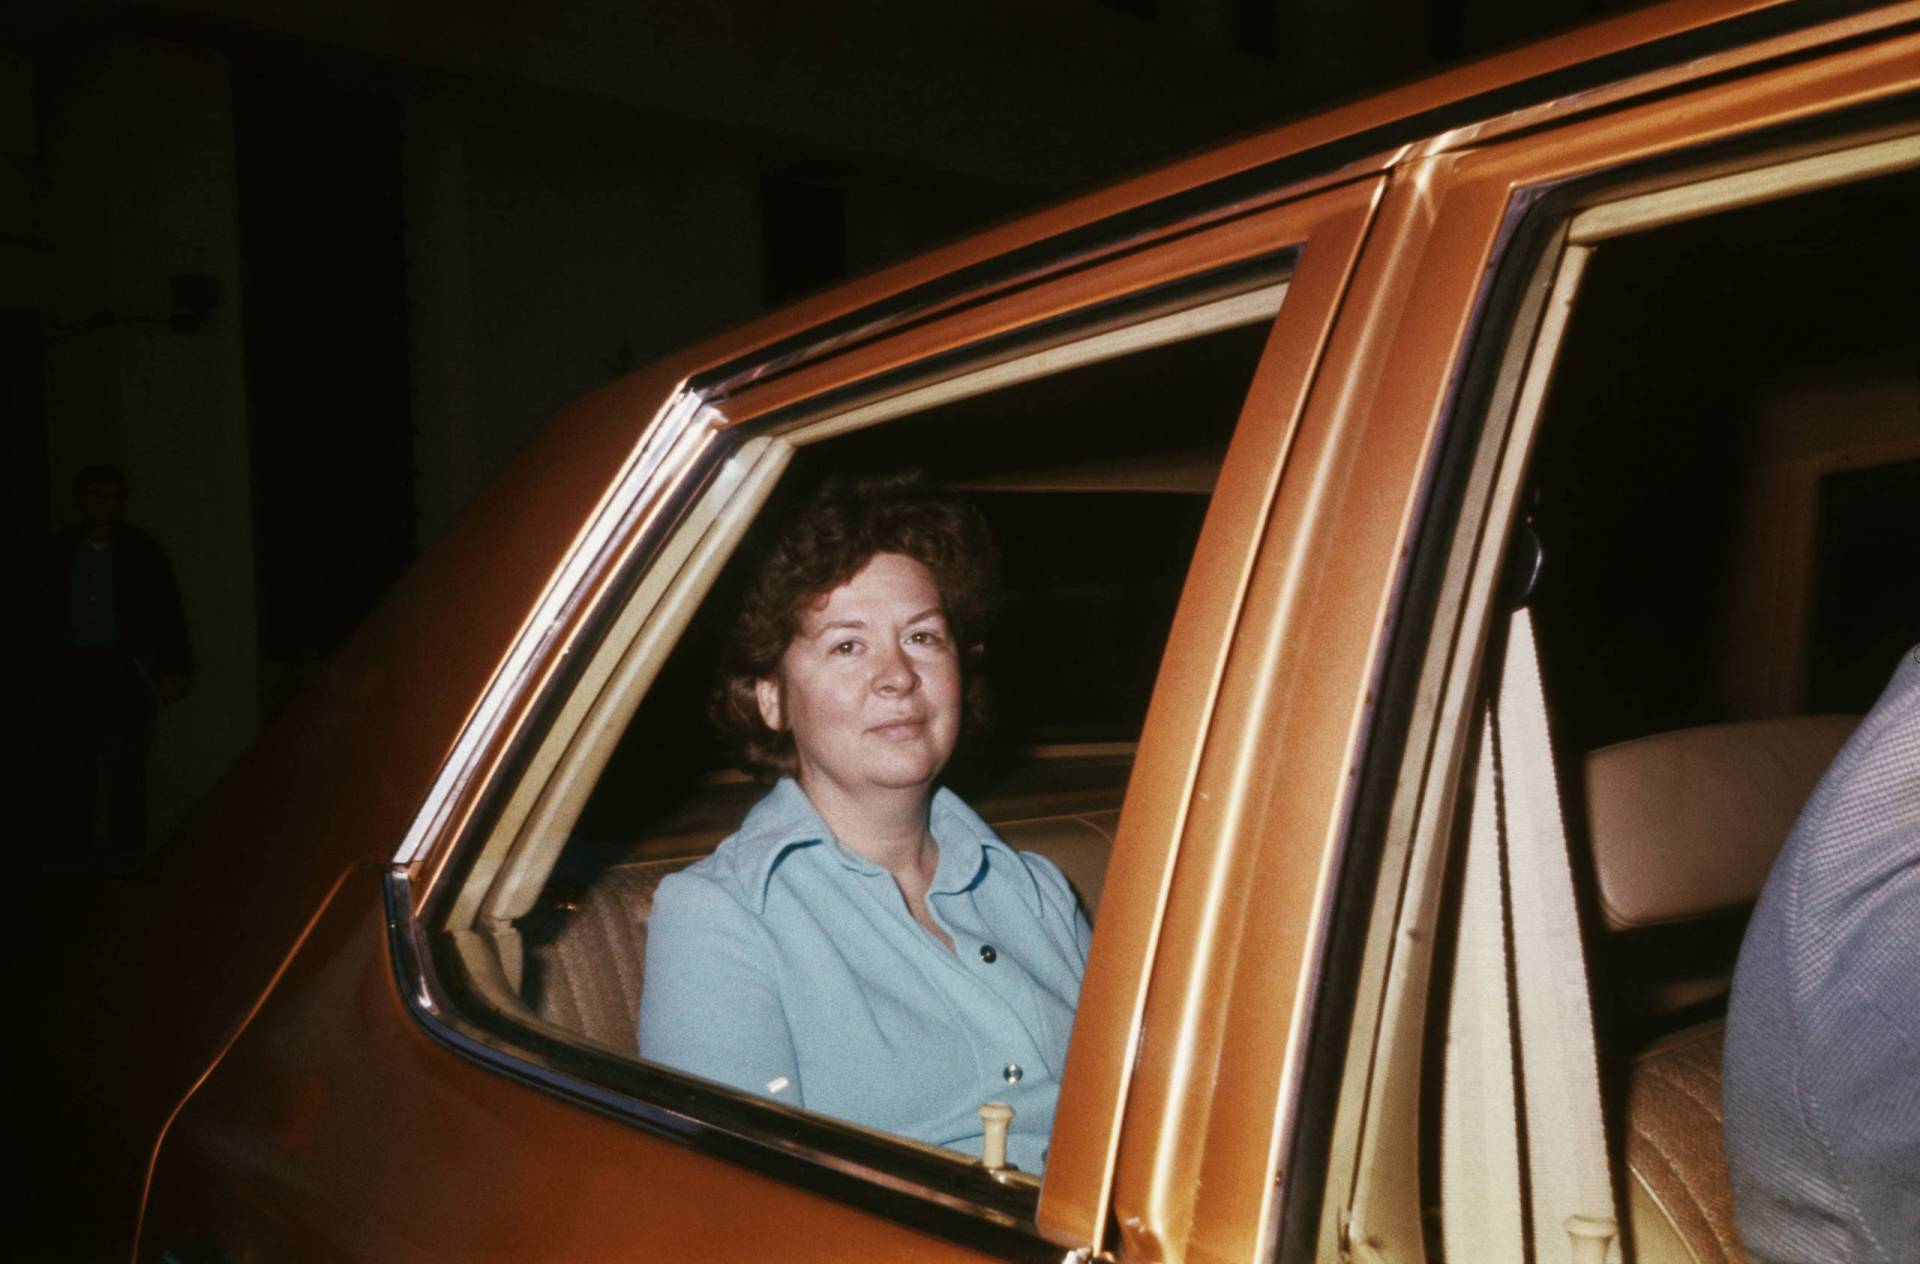 A white woman in pale blue 1970s-era clothing sits in the rear of a brown car.